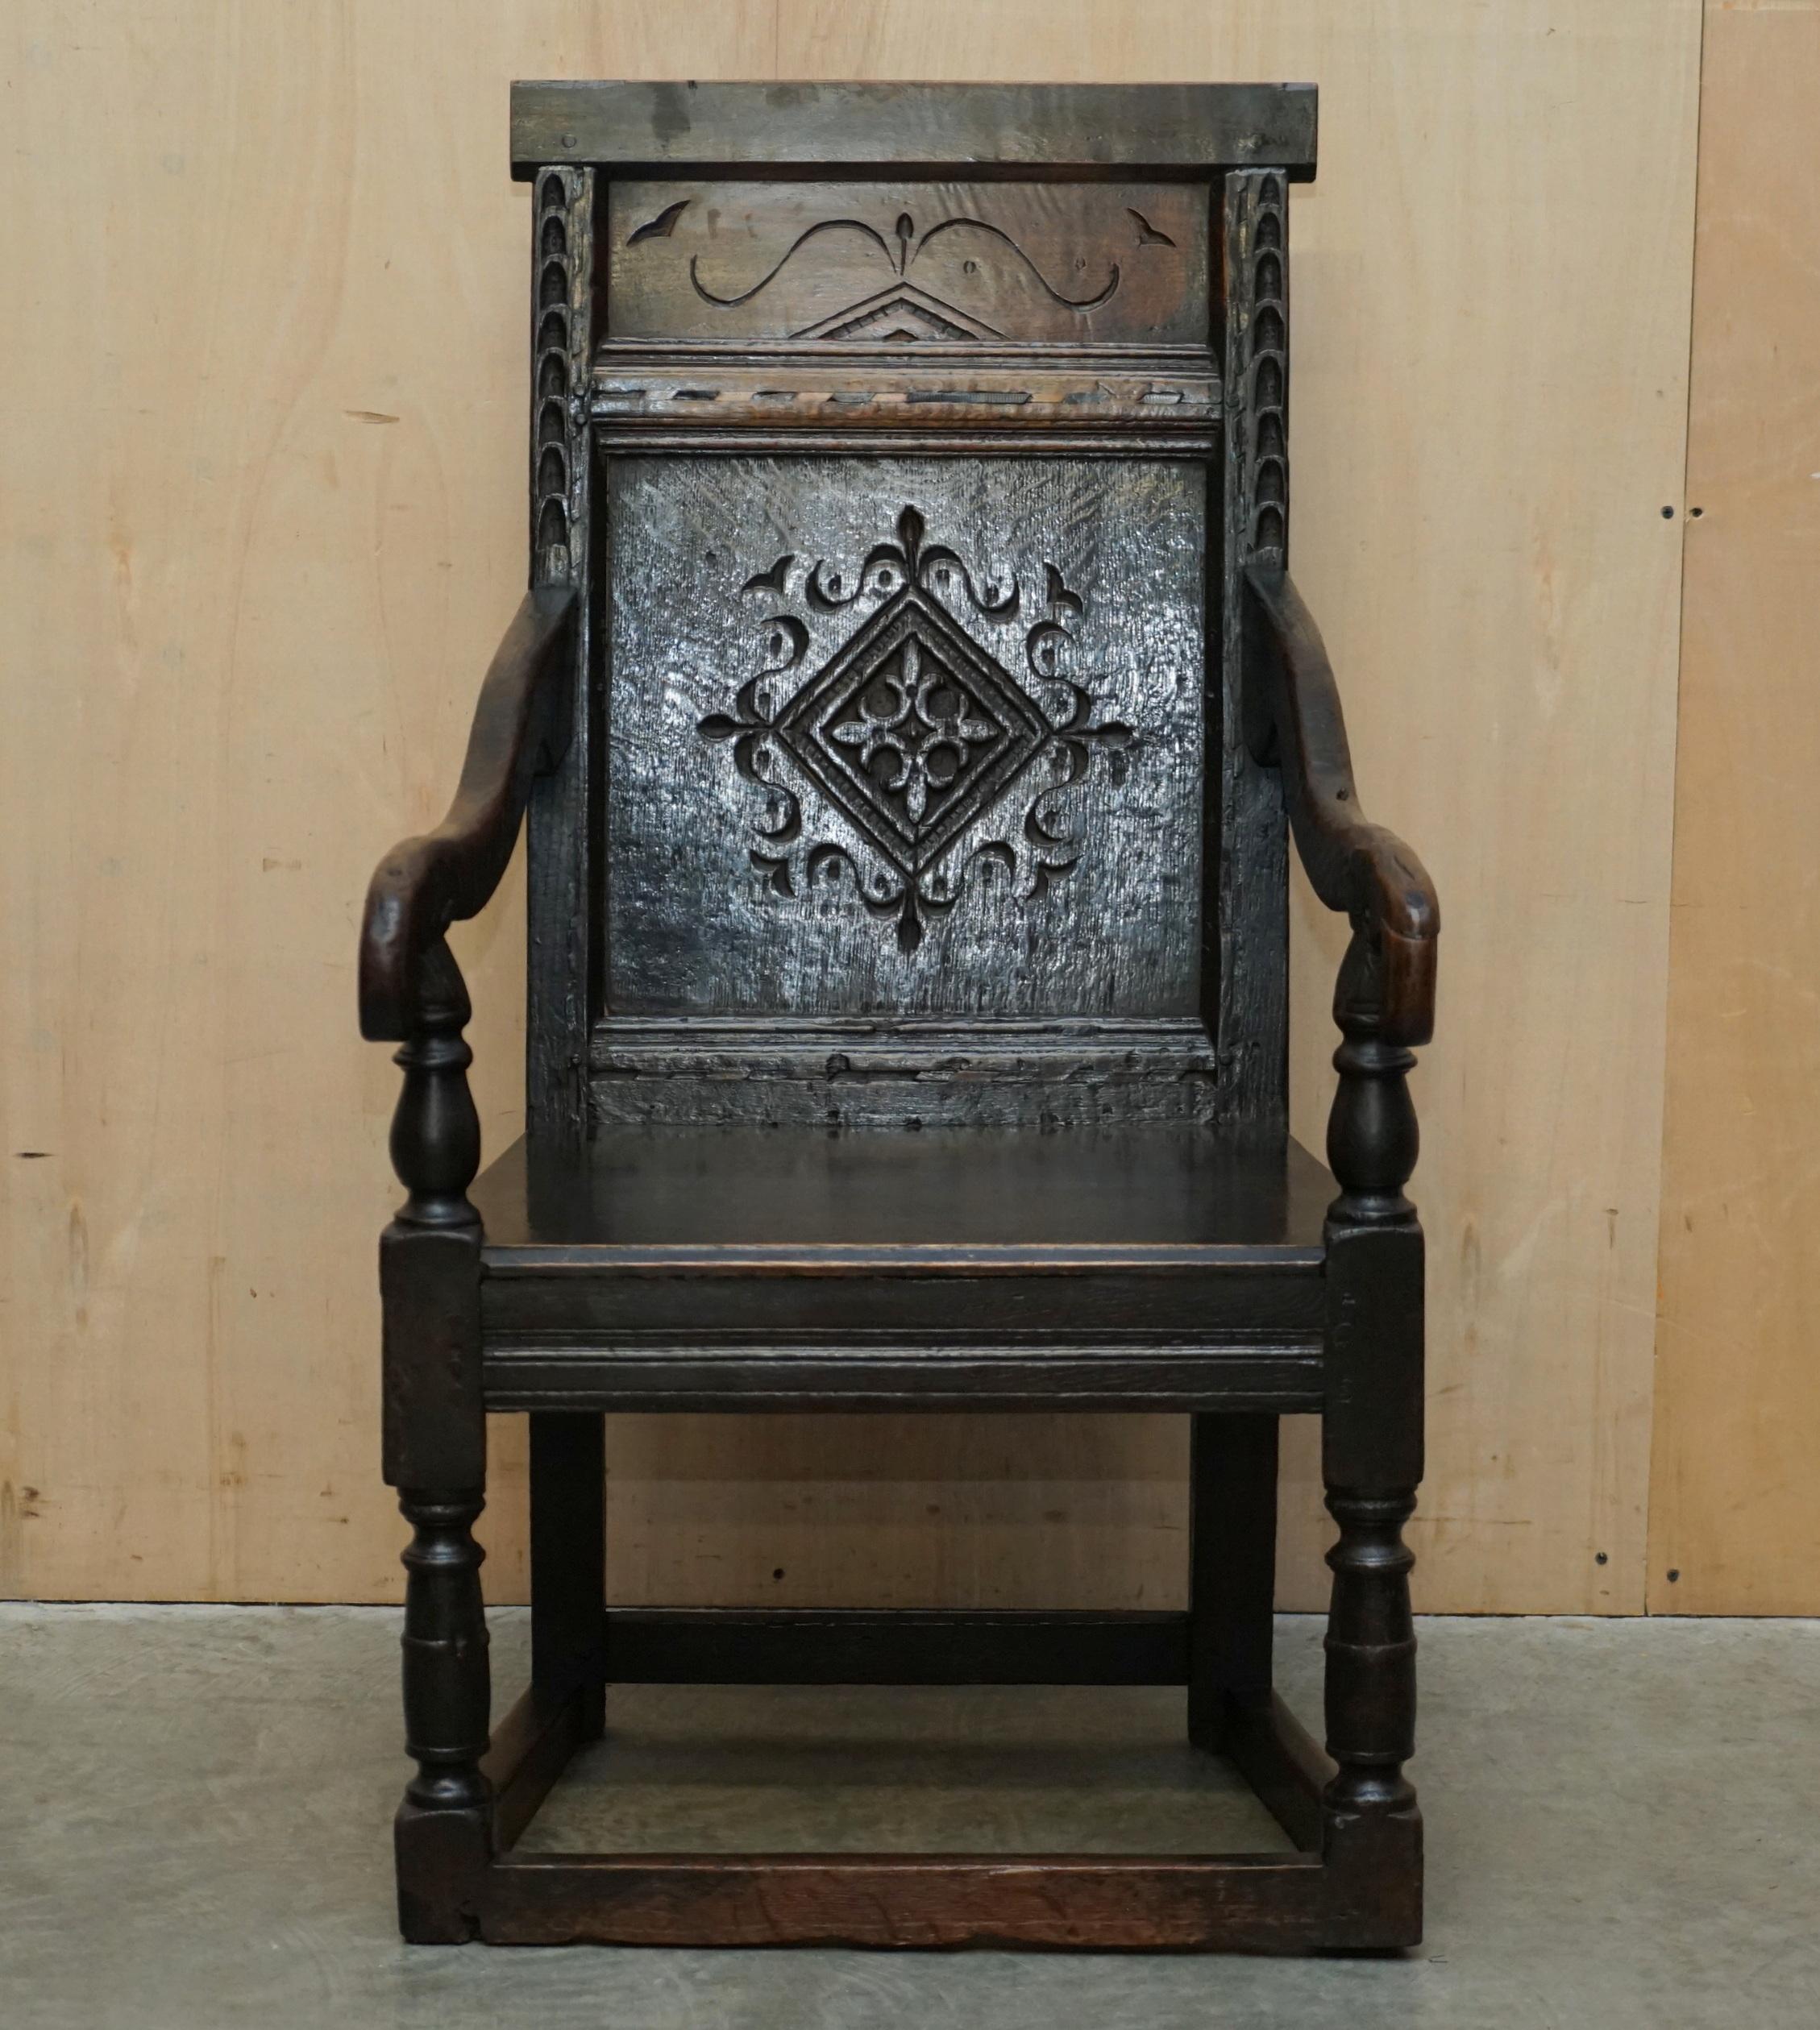 Royal House Antiques

Royal House Antiques are delighted to offer this original early 17th century Jacobean Wainscot armchair with Tudor style panelling

Please note the delivery fee listed is just a guide, it covers within the M25 only for the